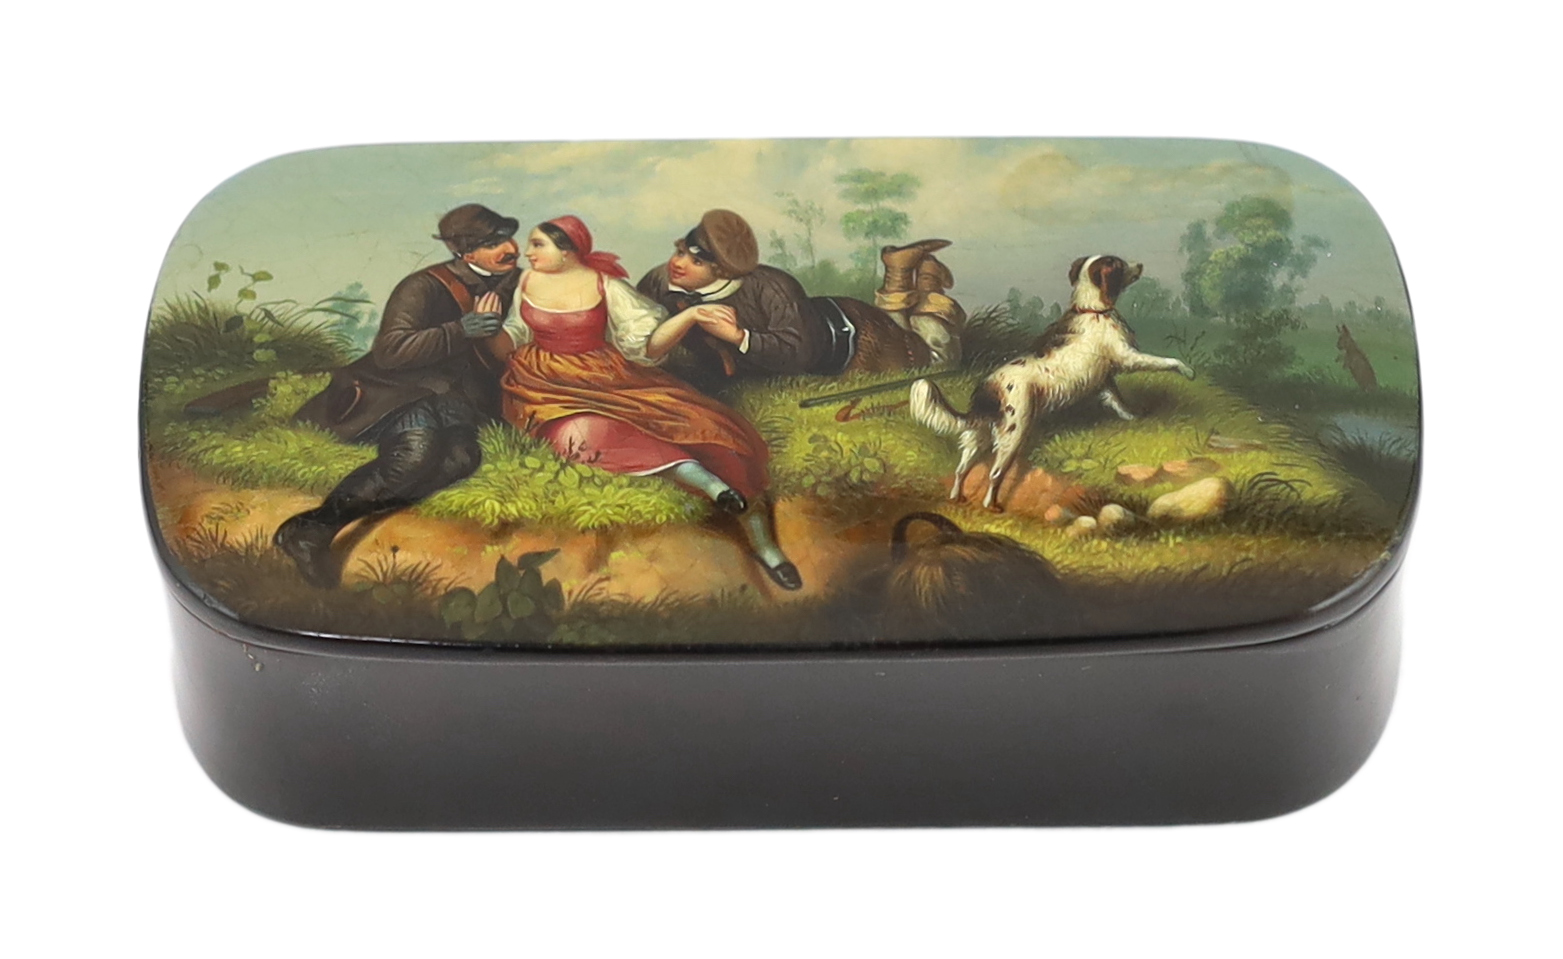 A fine Russian lacquer ‘Girl with admirers’ snuff box, by Lukutin, c.1840                                                                                                                                                   